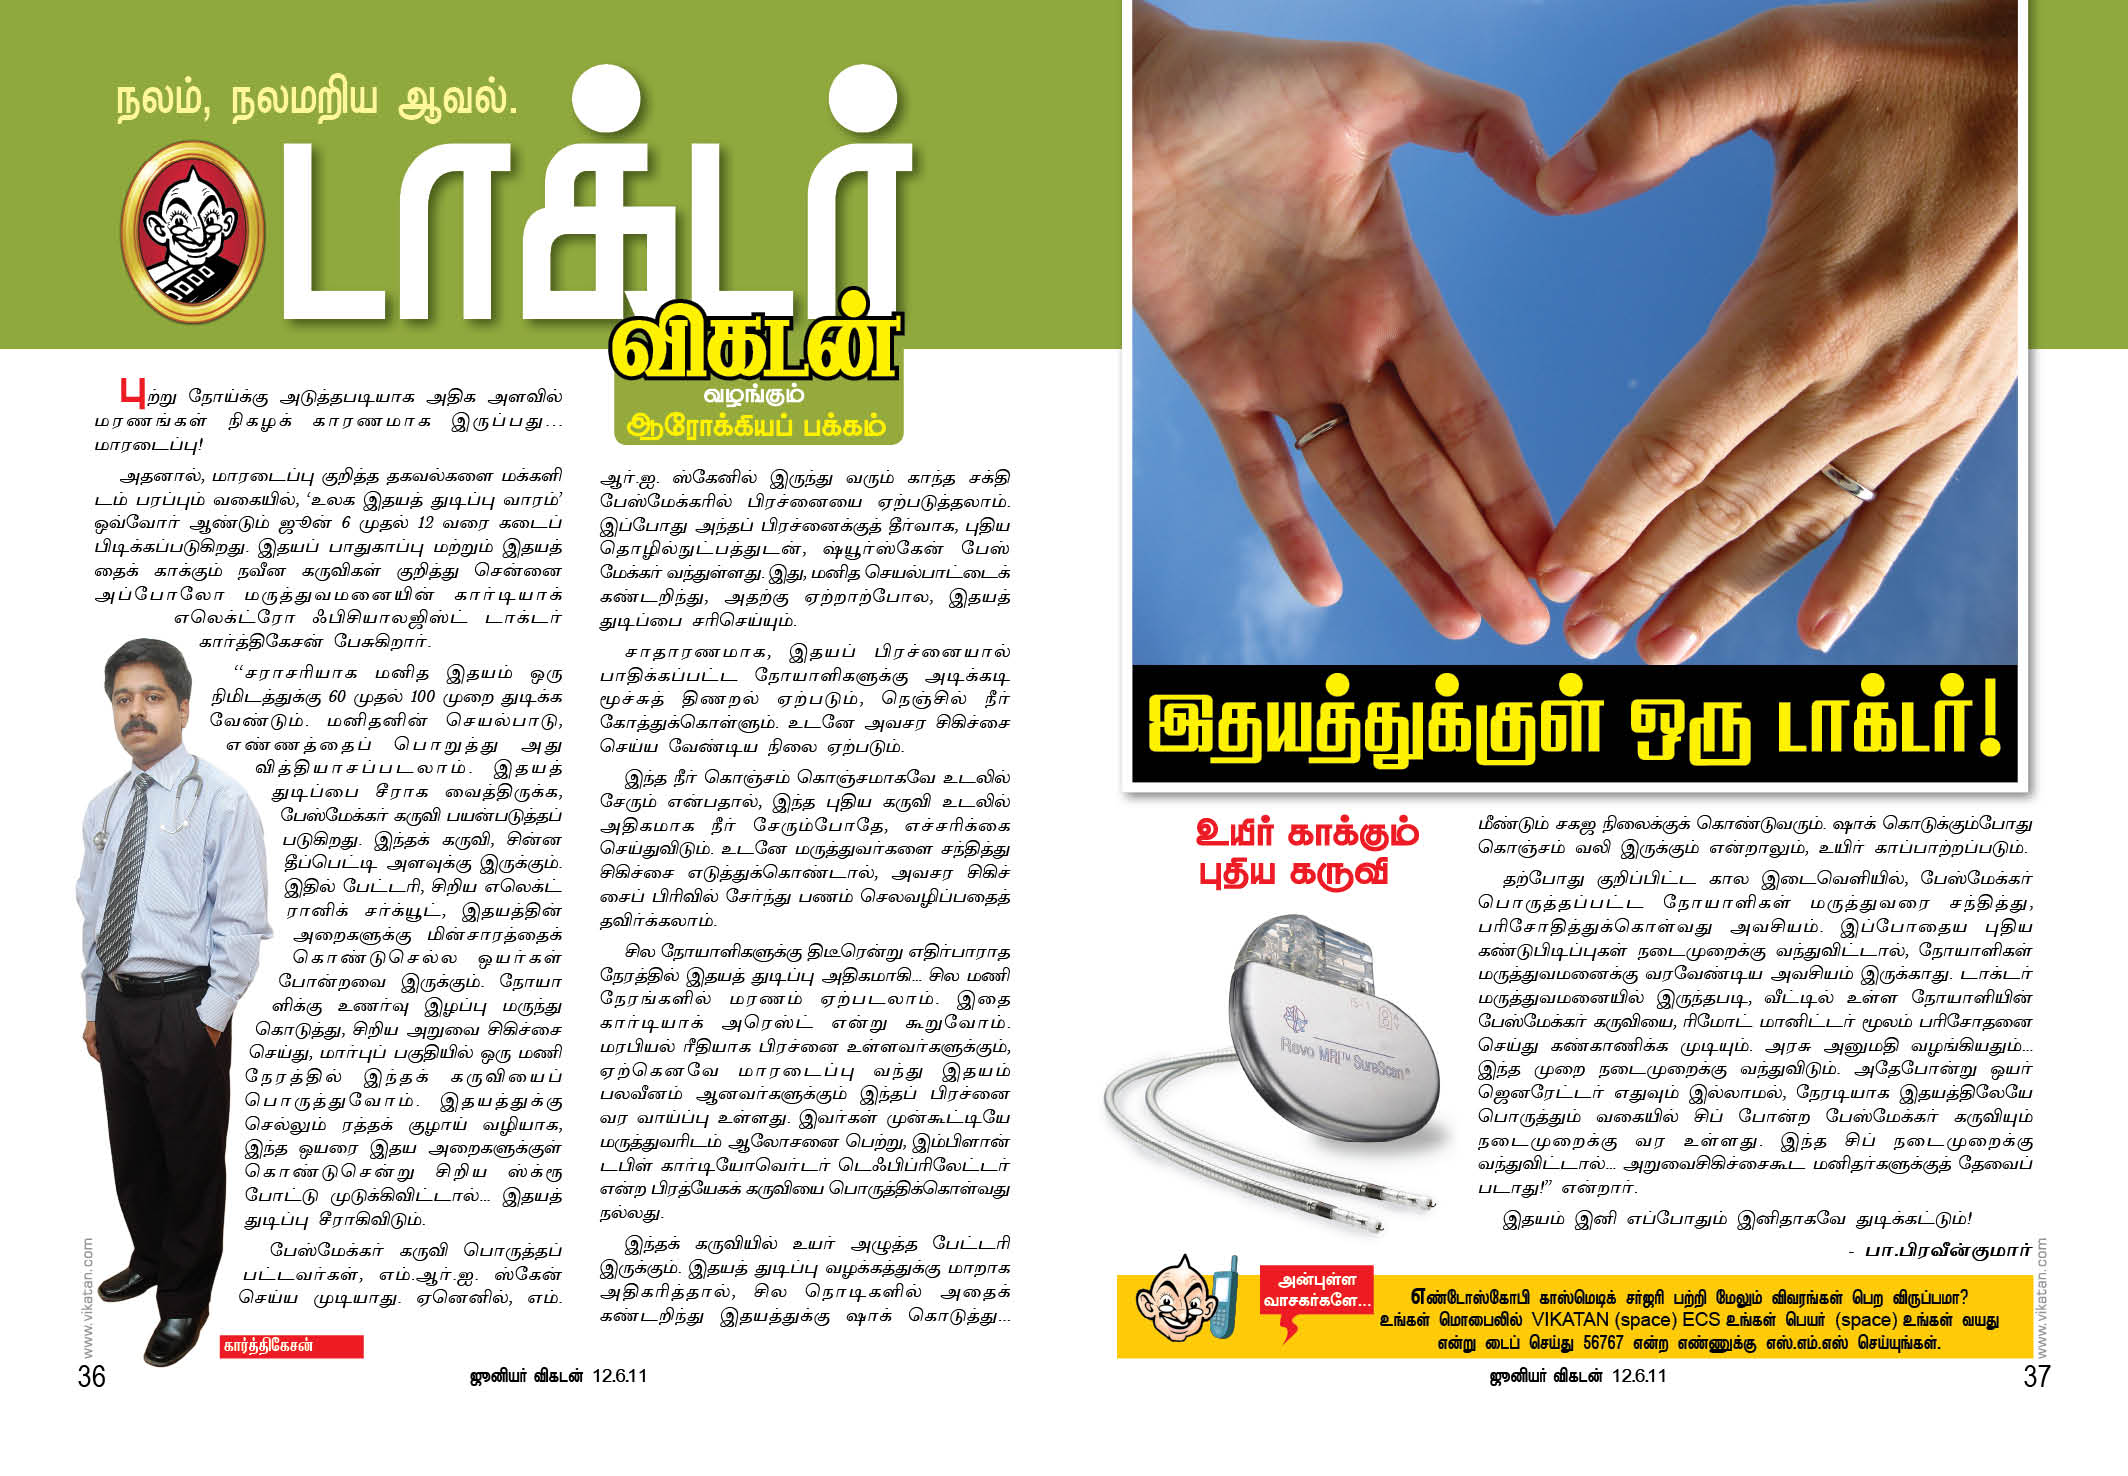 Image of a news article about heart care by Dr. Karthigesan A.M.